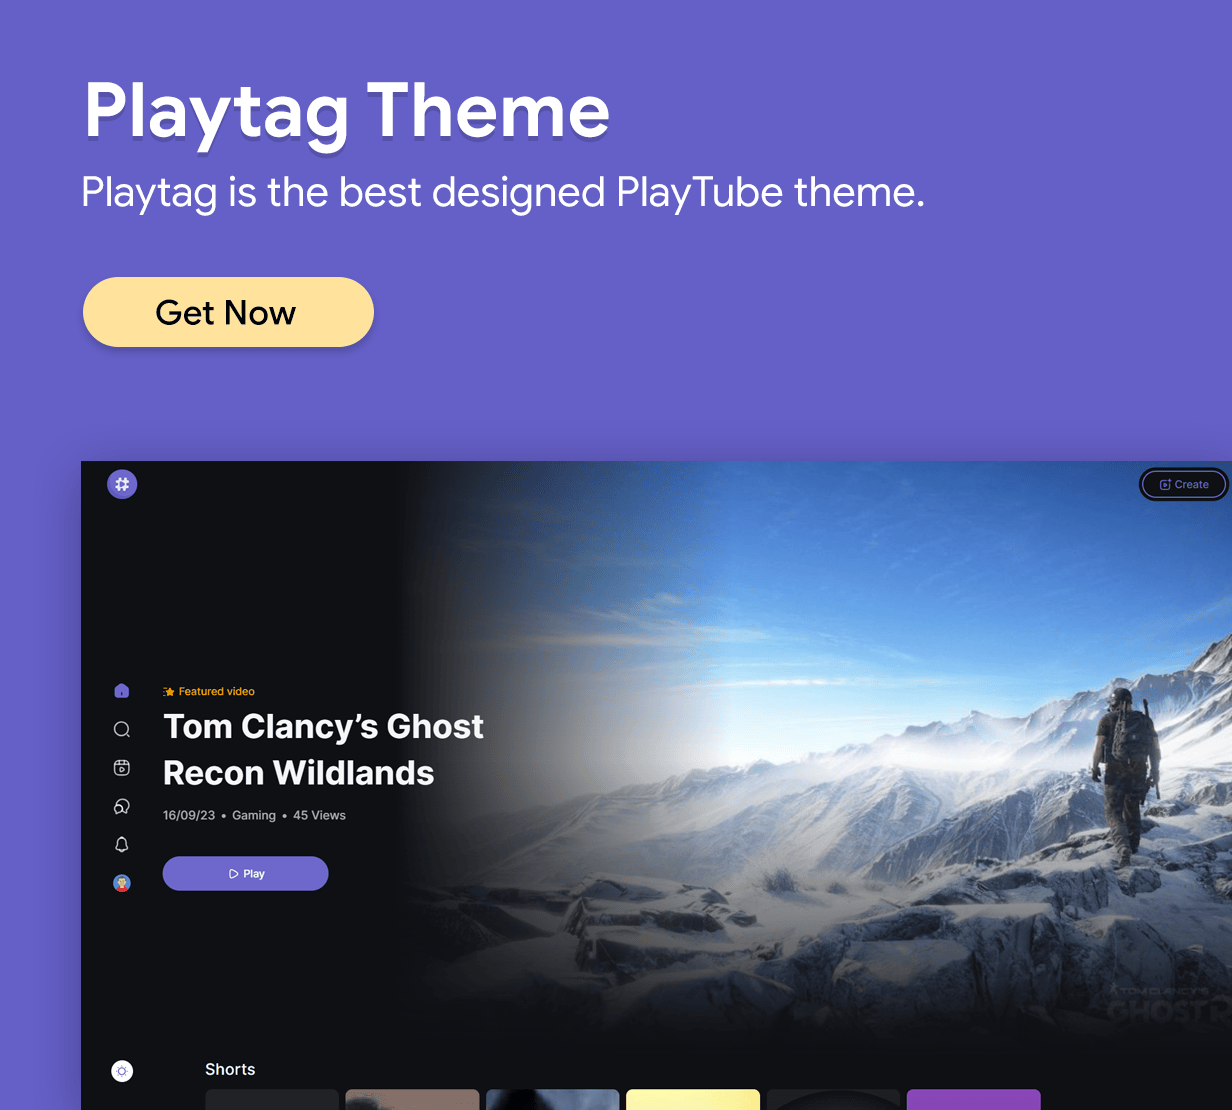 PlayTube - The Ultimate PHP Video CMS & Video Sharing Platform - 5